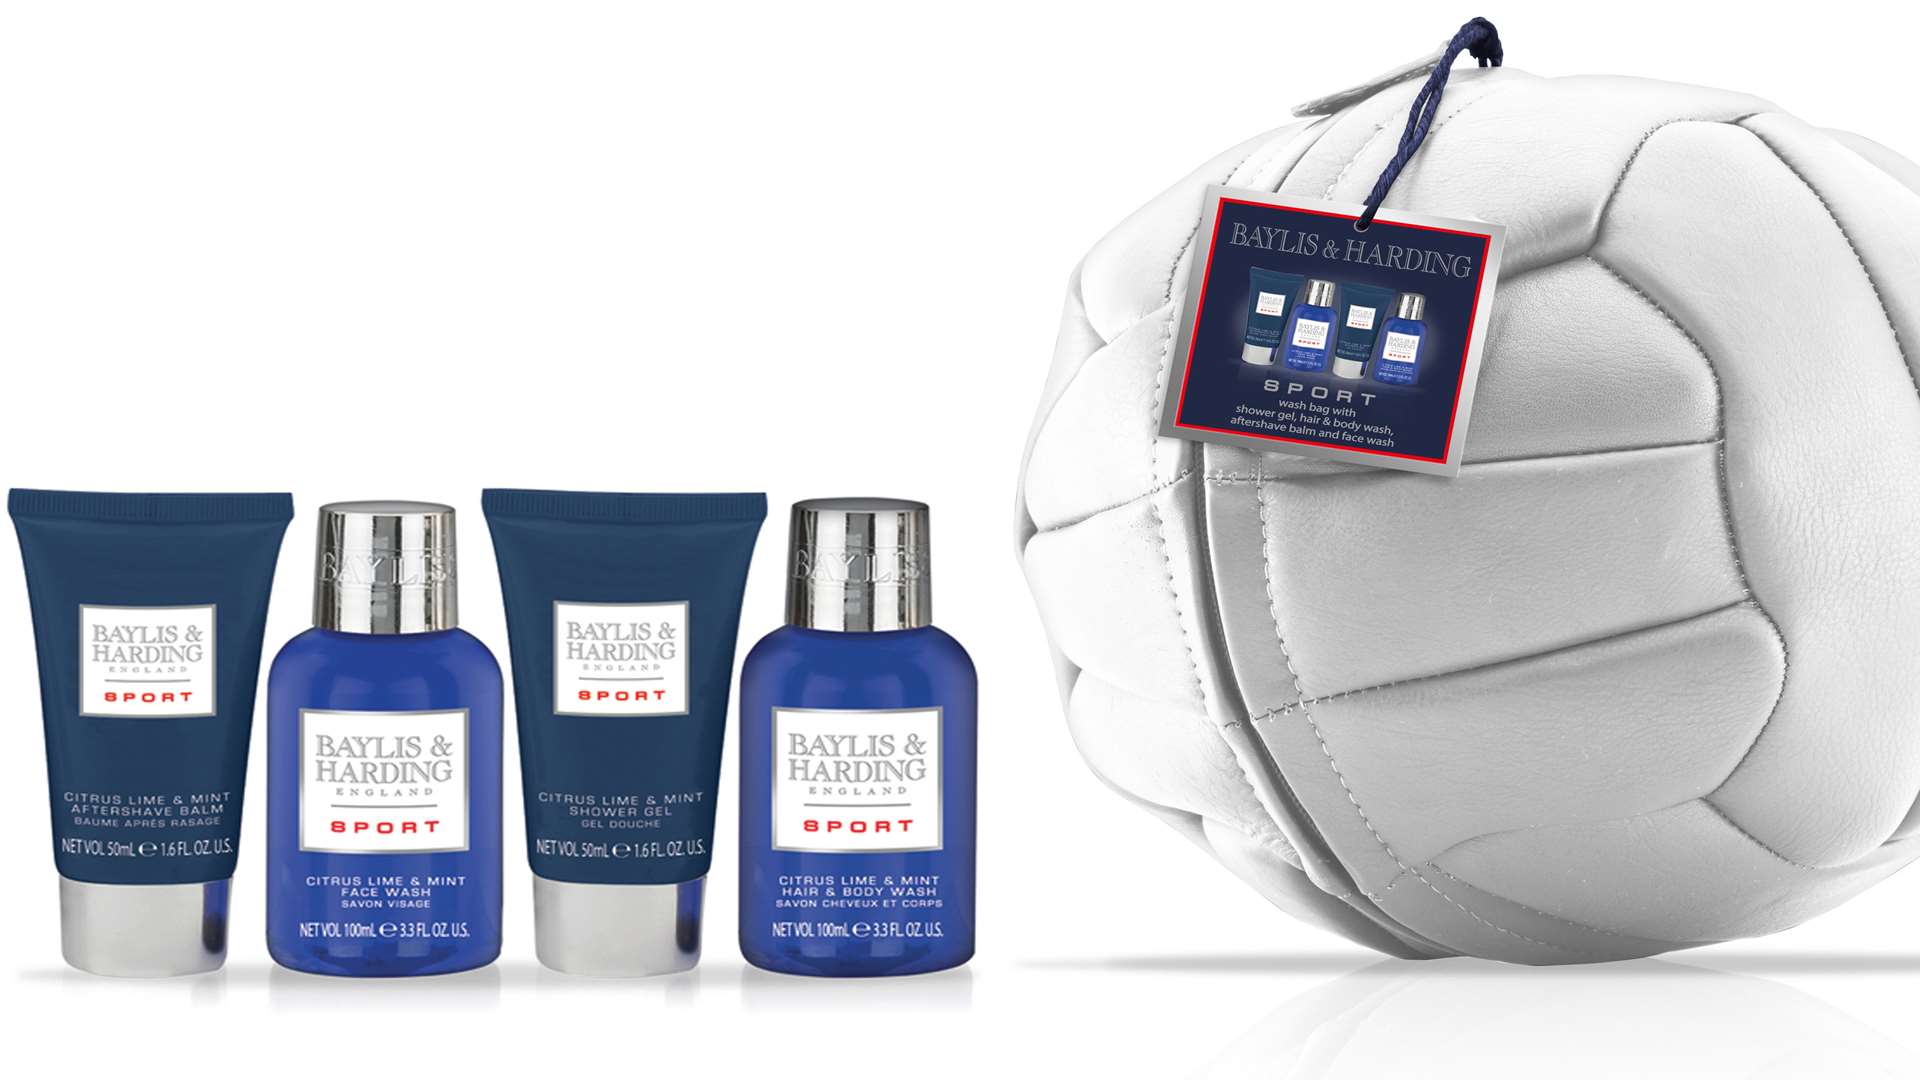 This Baylis & Harding football-shaped wash bag set is perfect for any dad gripped by Euro 2016 fever. Buy it for £20 at Tesco